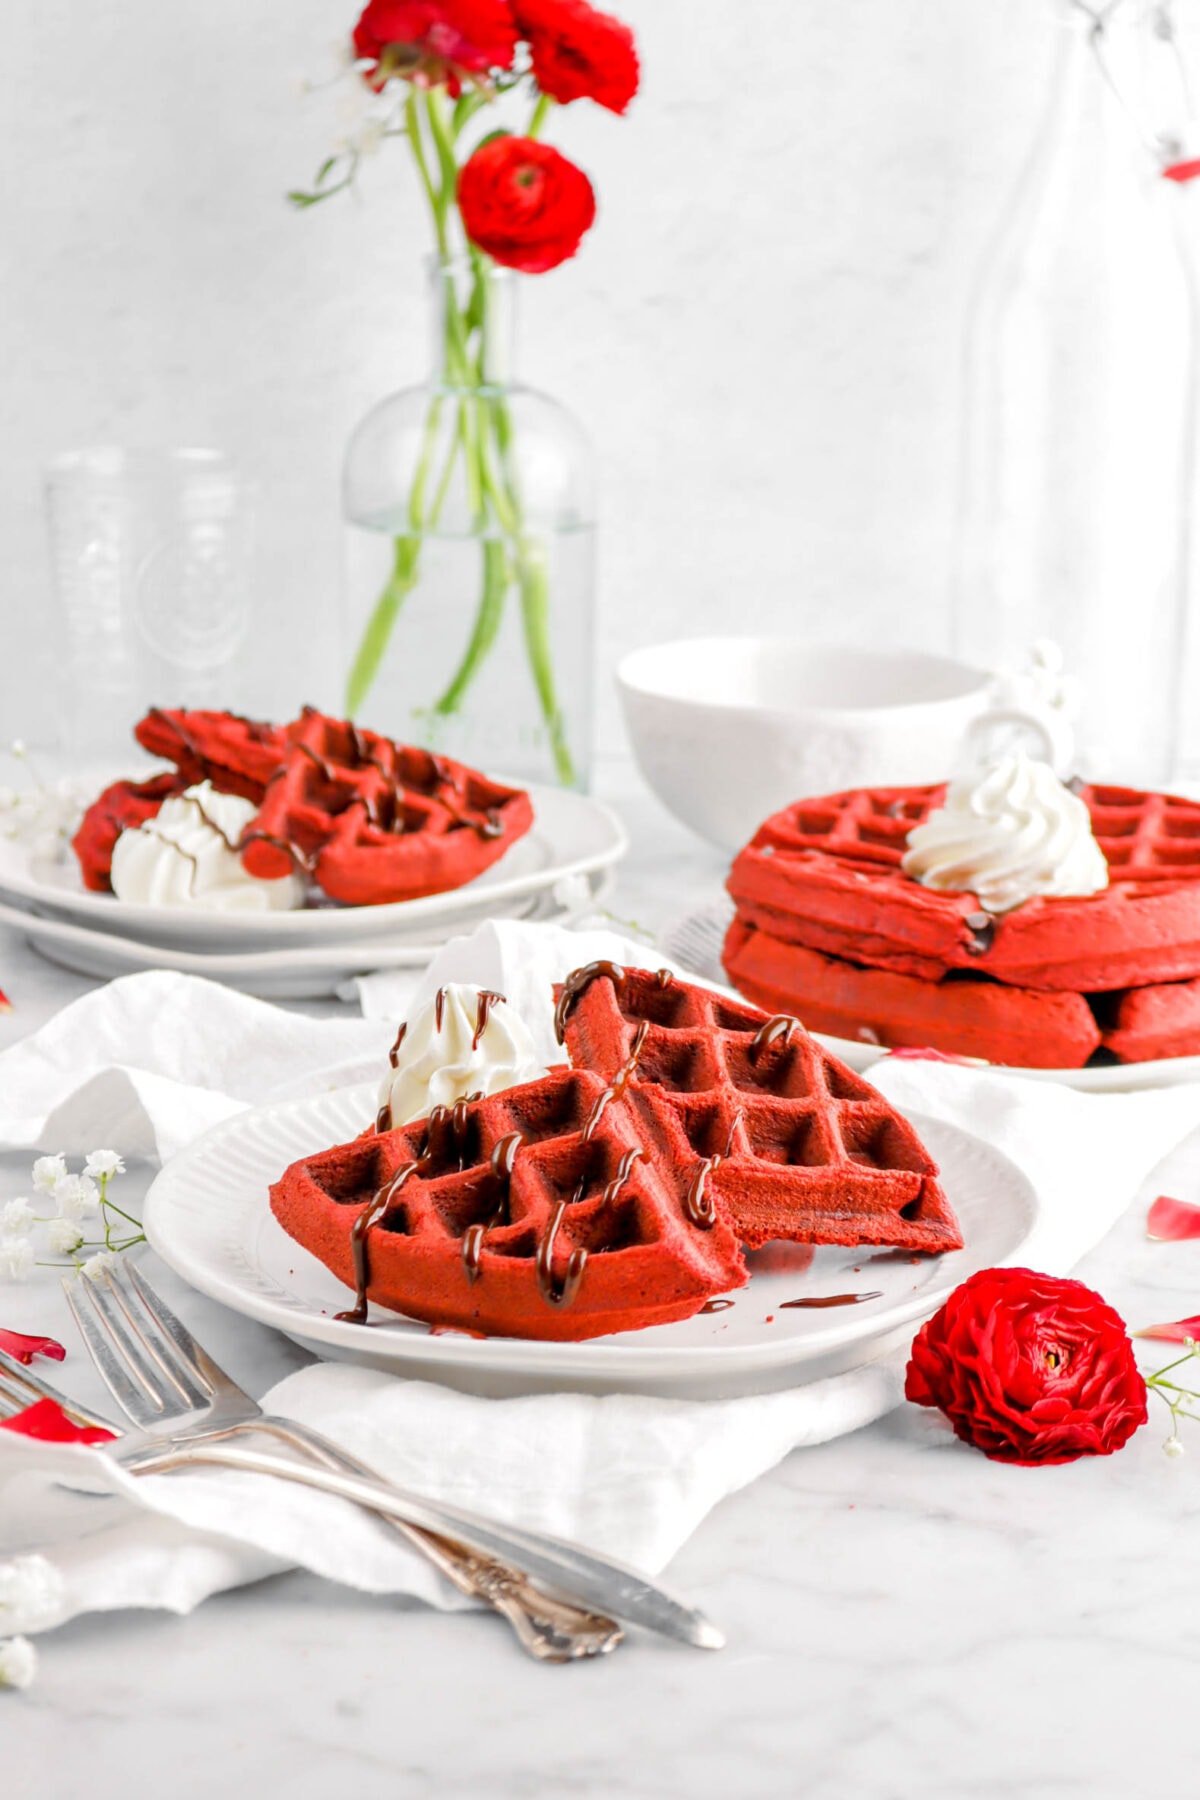 three plates of red velvet waffles on white plates with red flowers, two forks, and a white napkin